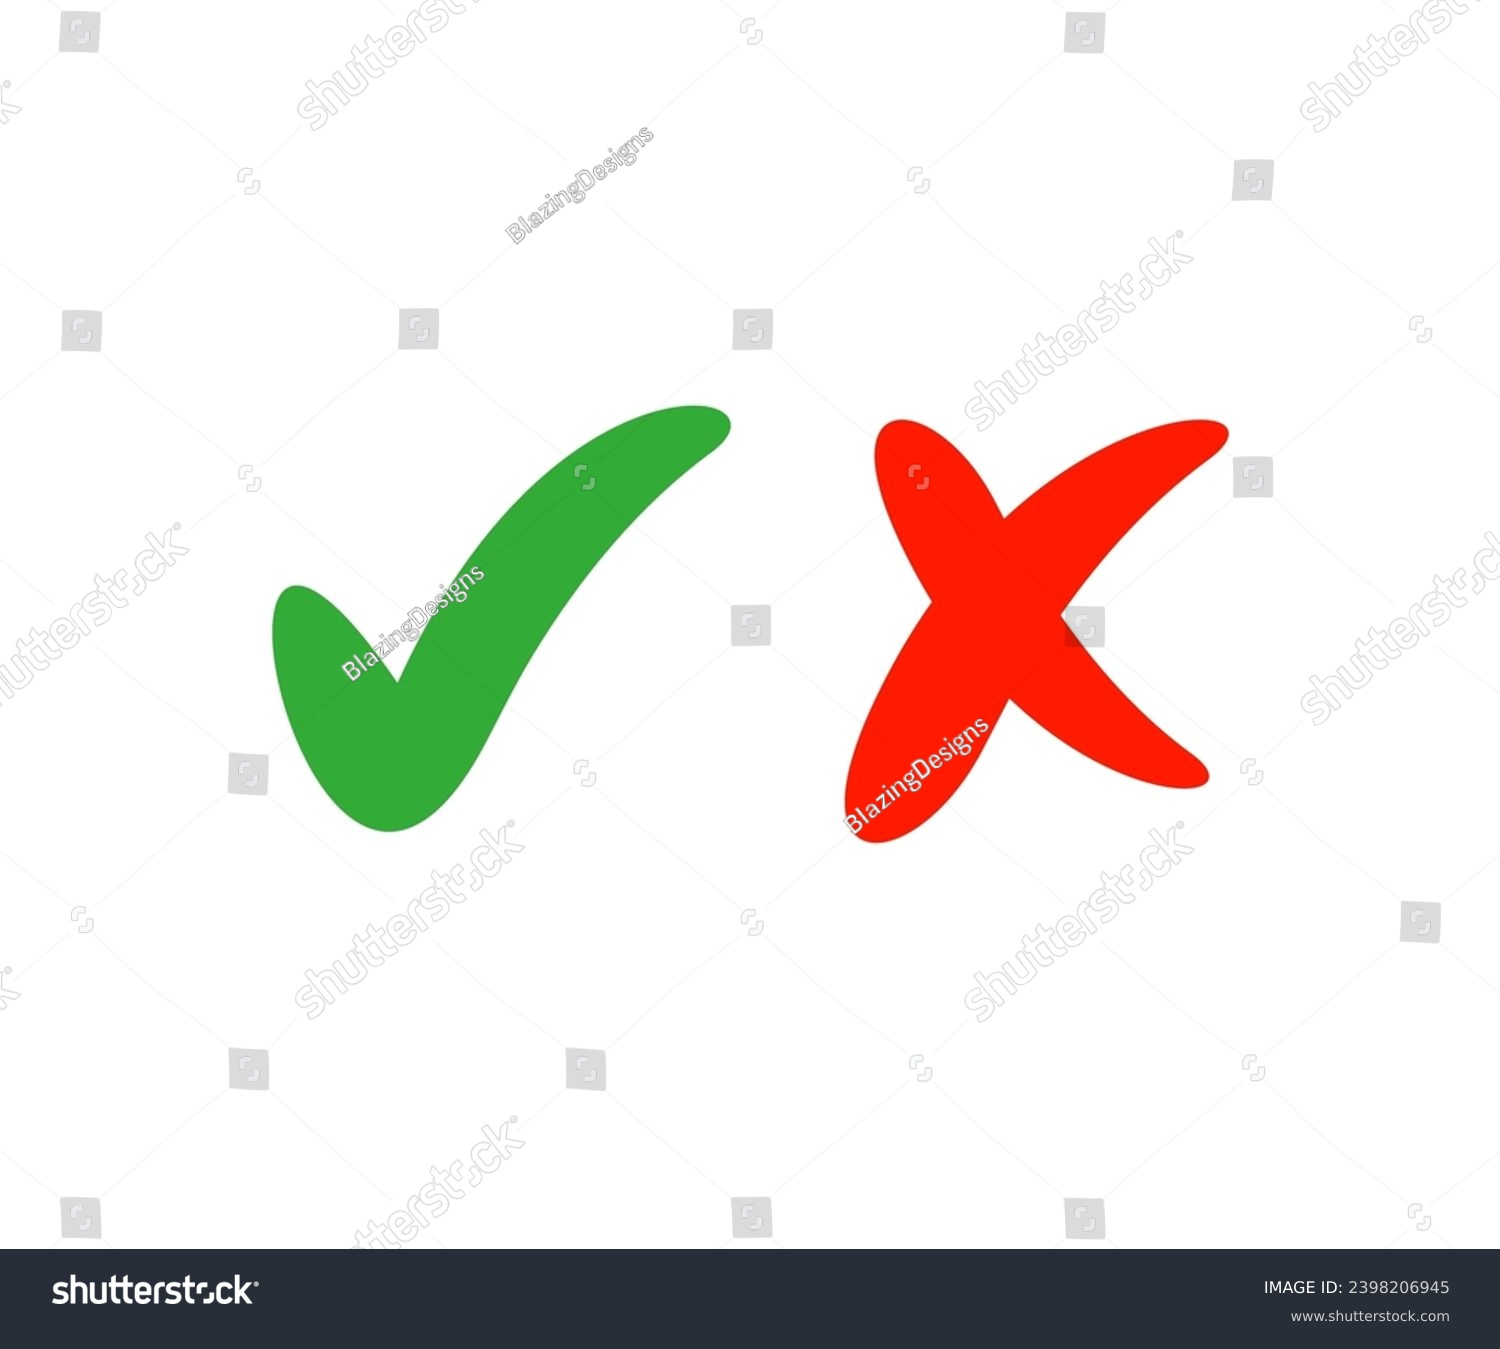 Check mark and cross icon. Flat, color, approved and denied icons, checkmarks and crosses vector design and illustration.
 #2398206945